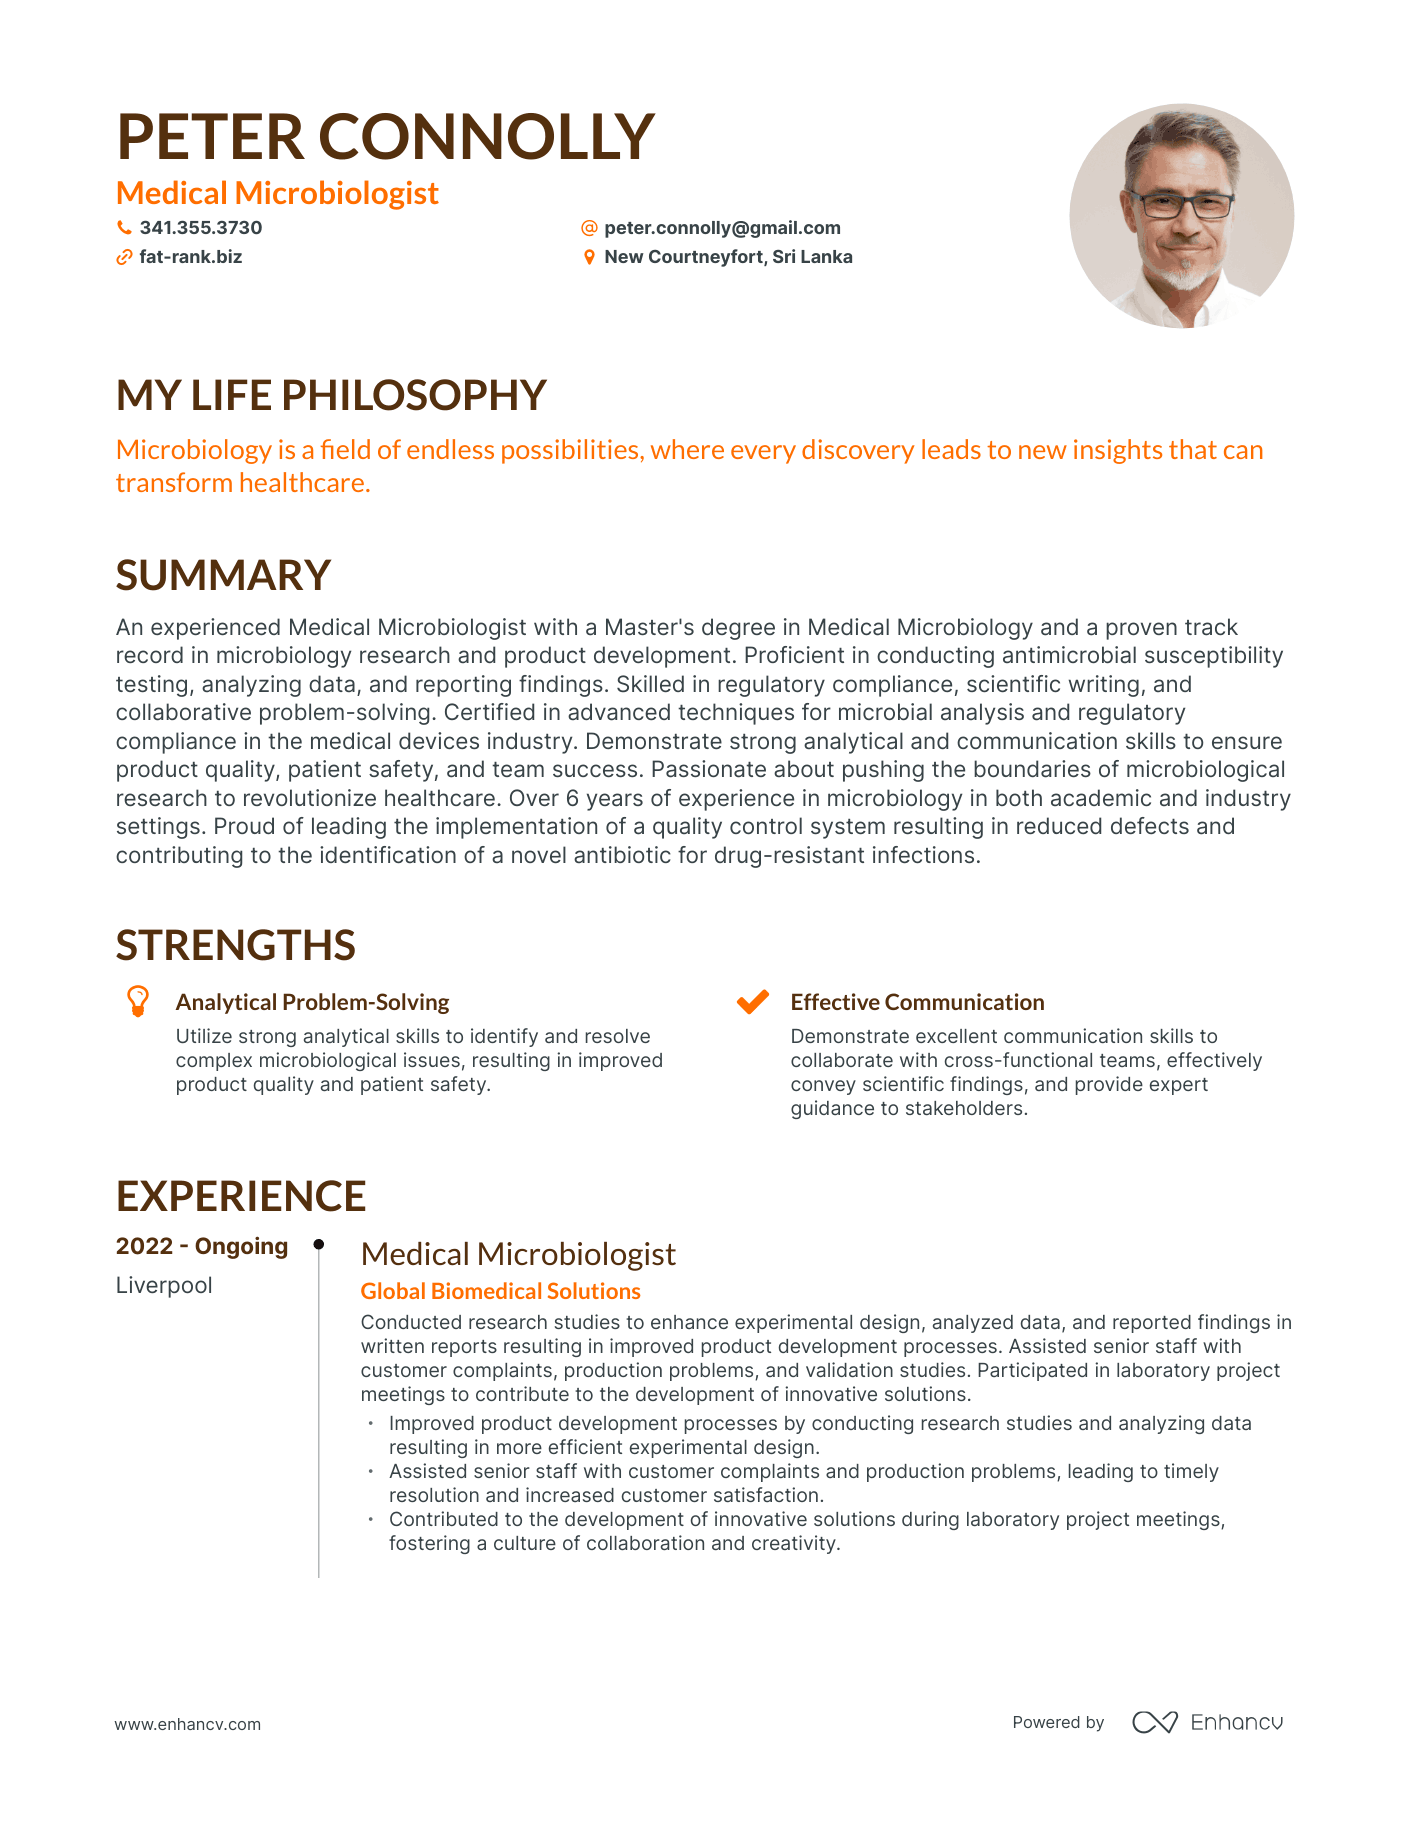 Creative Medical Microbiologist Resume Example